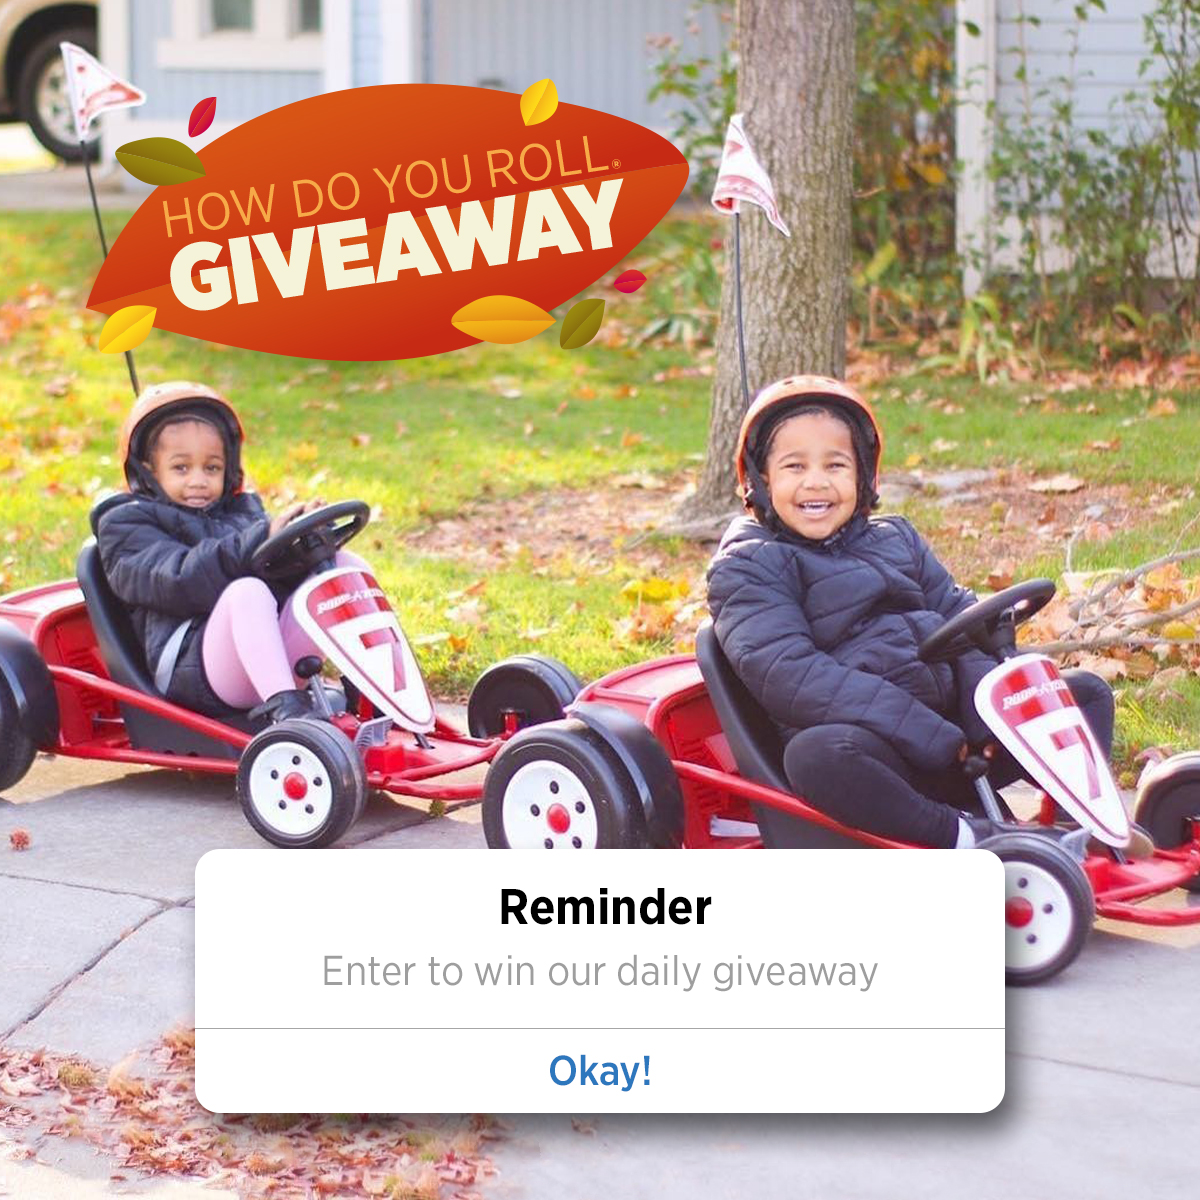 Enter the Radio Flyer Daily Giveaway How Do You Roll® Radio Flyer